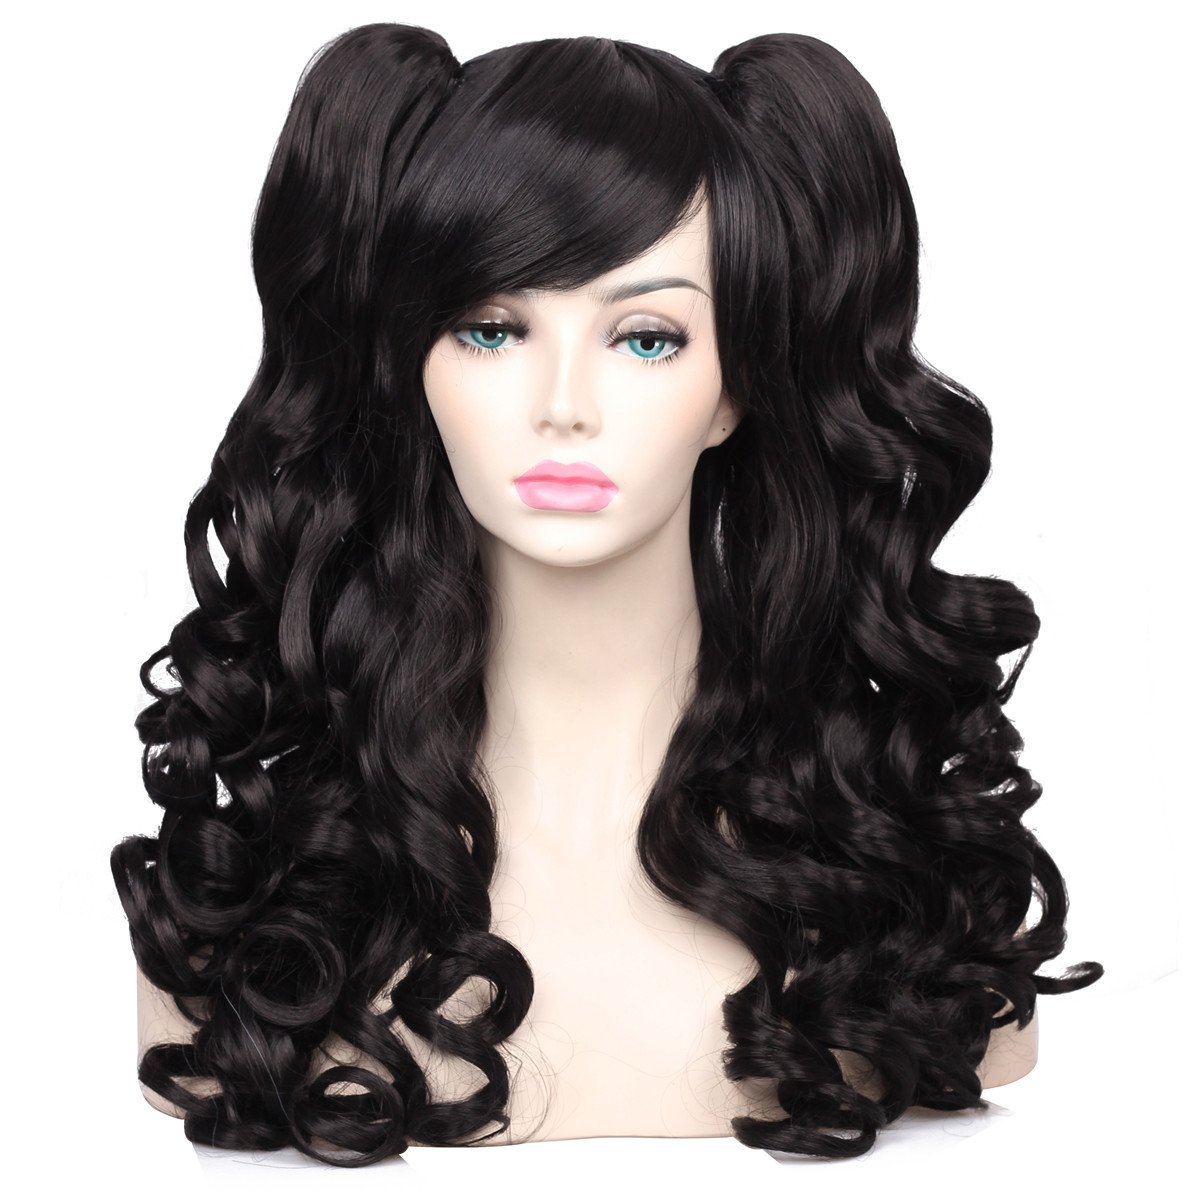 Price:$27.90    ColorGround Long Curly Cosplay Wig with 2 Ponytails(Black)  Beauty